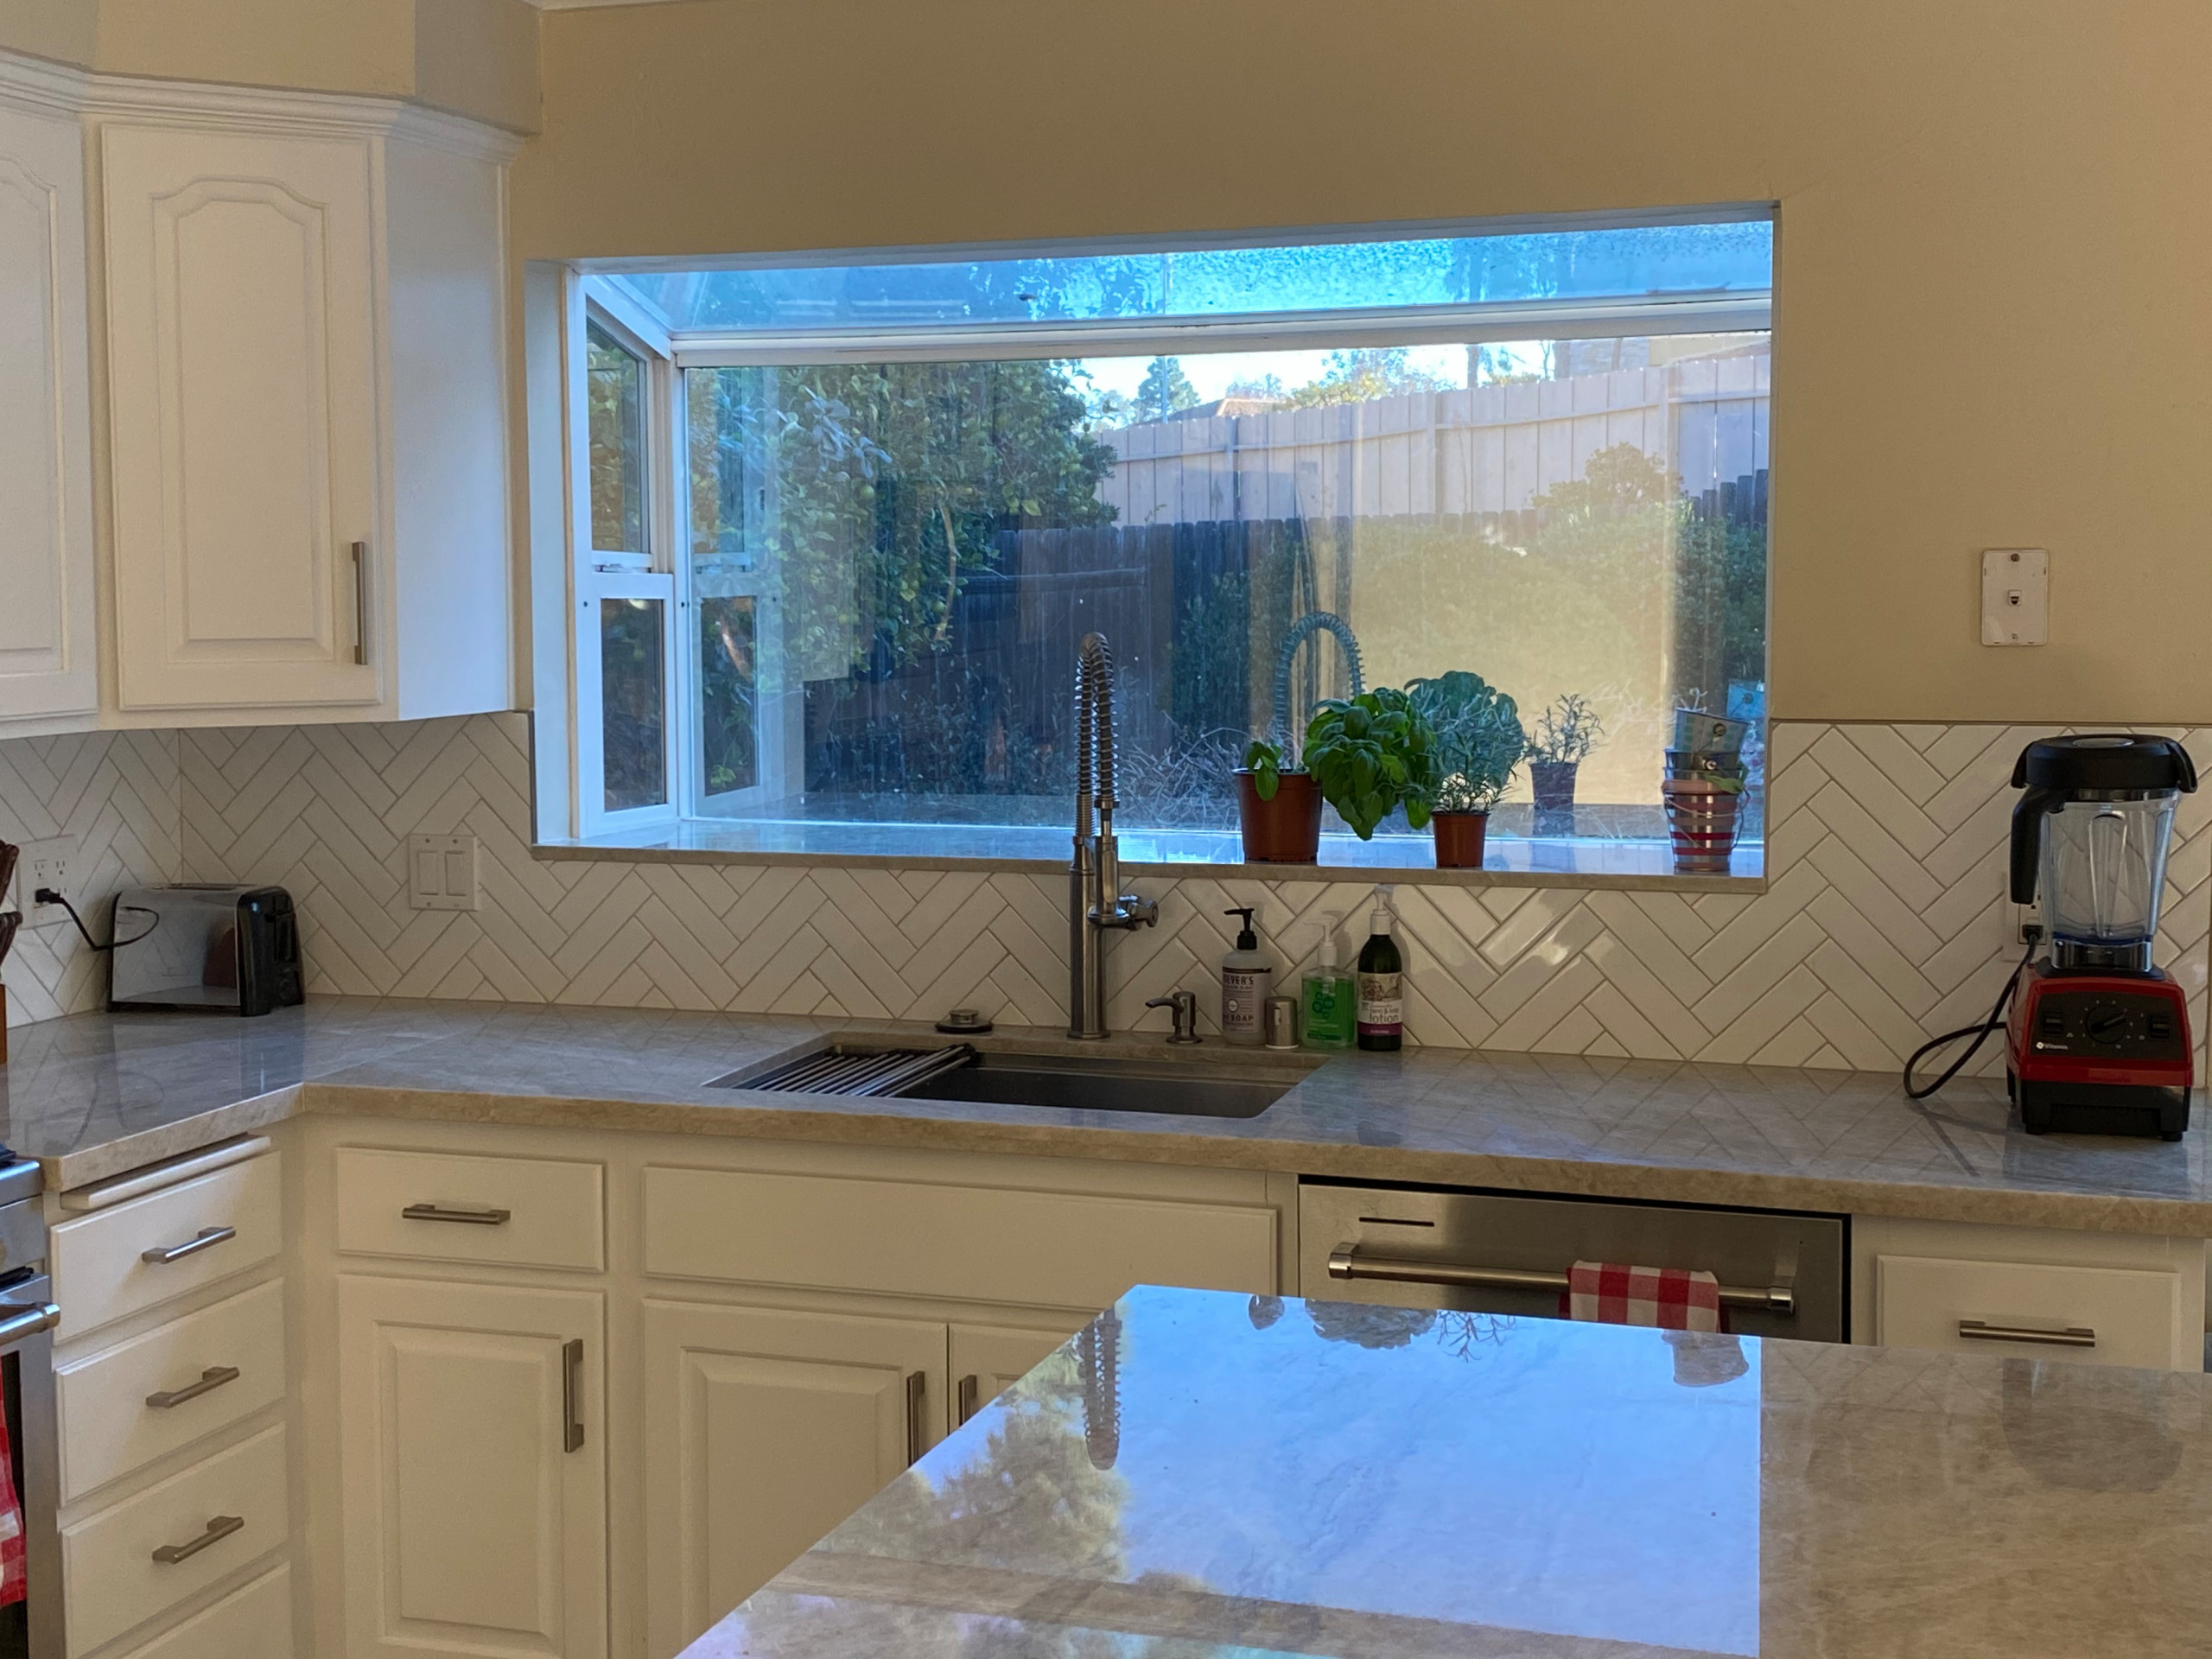 San Diego - Kitchen Remodel & Painting